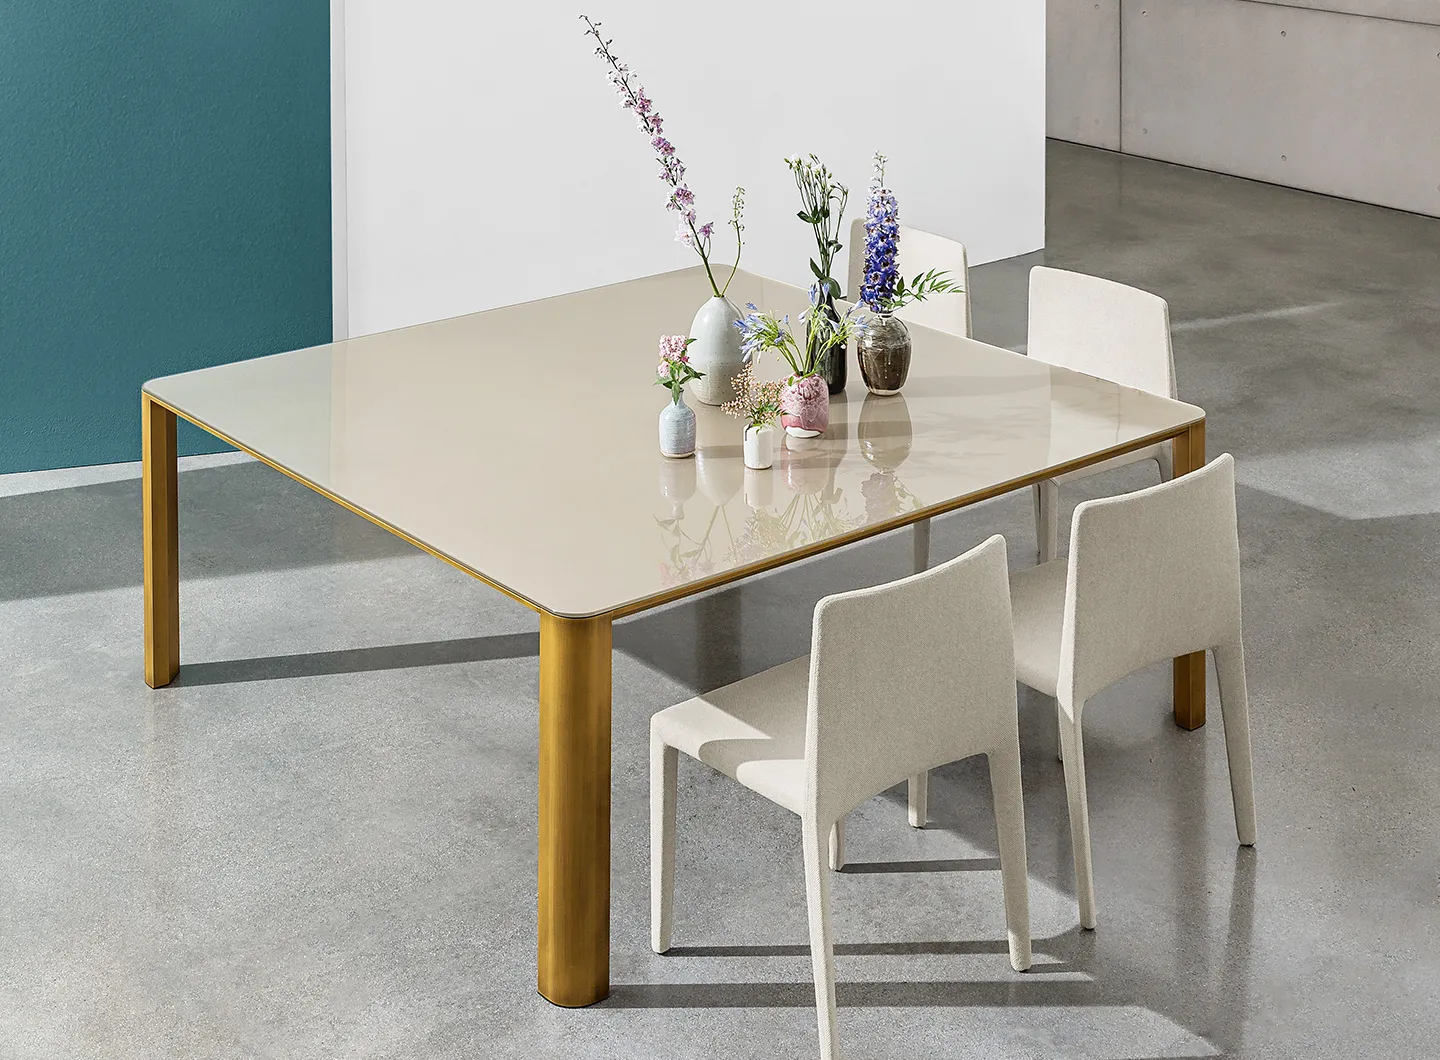 SOVET Kodo dining table and Pura chairs